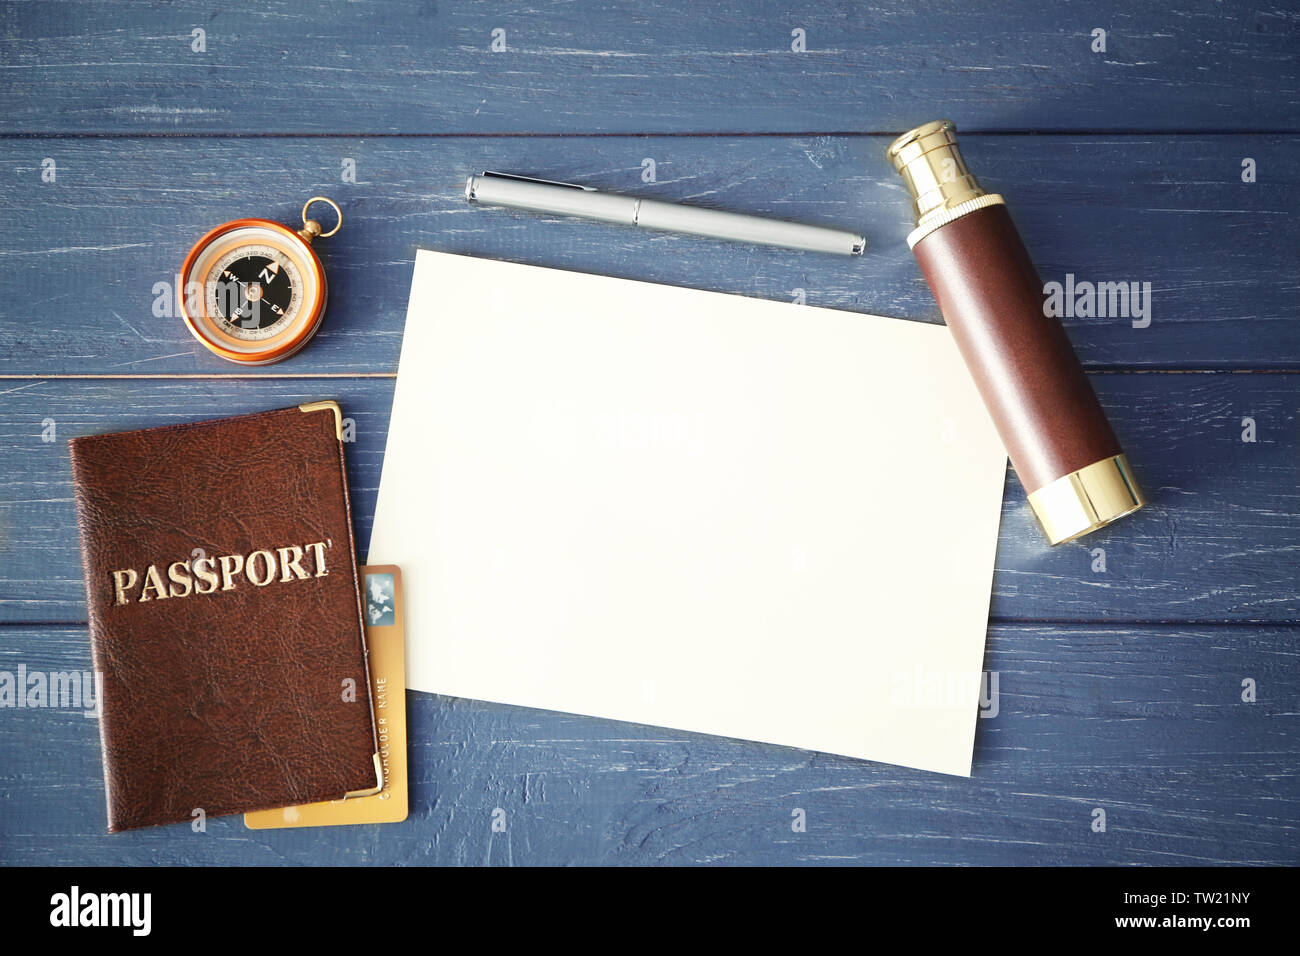 Travel concept. Passport, blank notepad page, compass and spyglass on wooden background Stock Photo